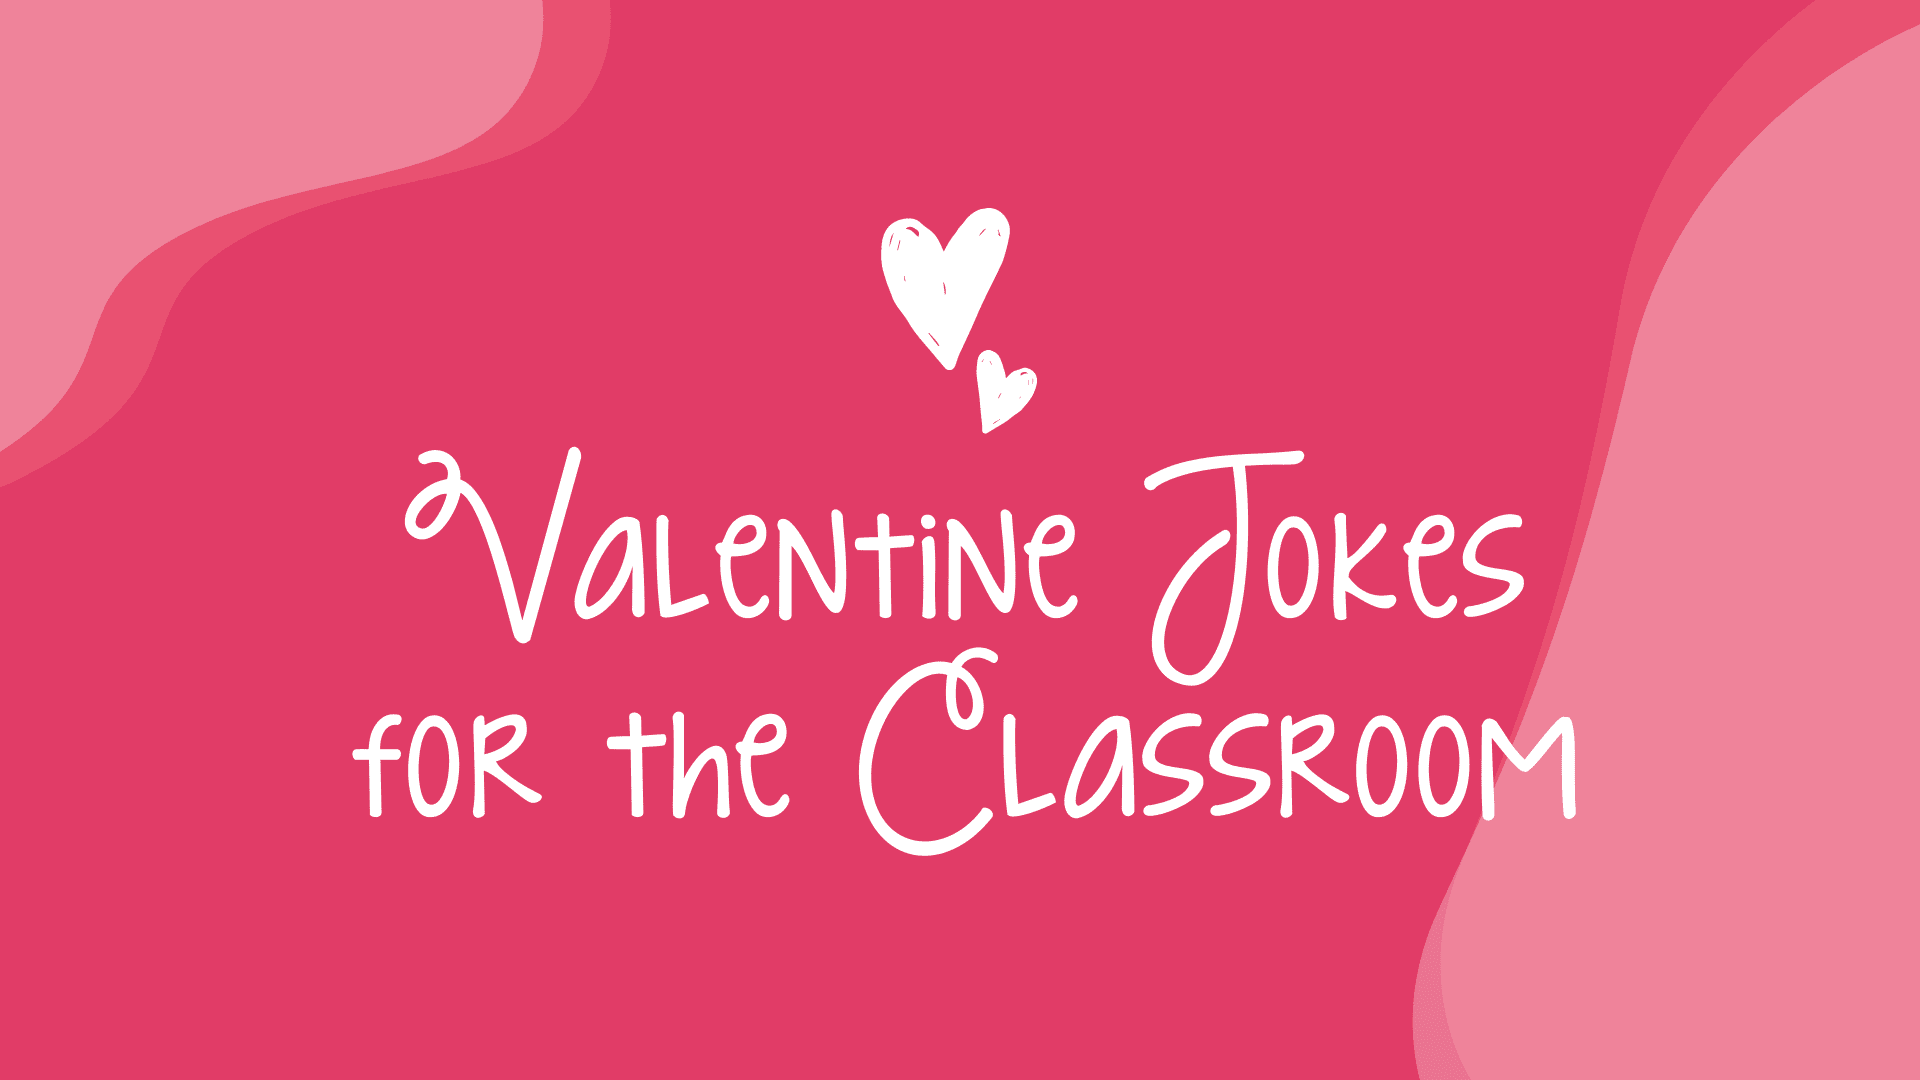 Punny valentine jokes for the classroom on a a pink background with two hearts for teachers.